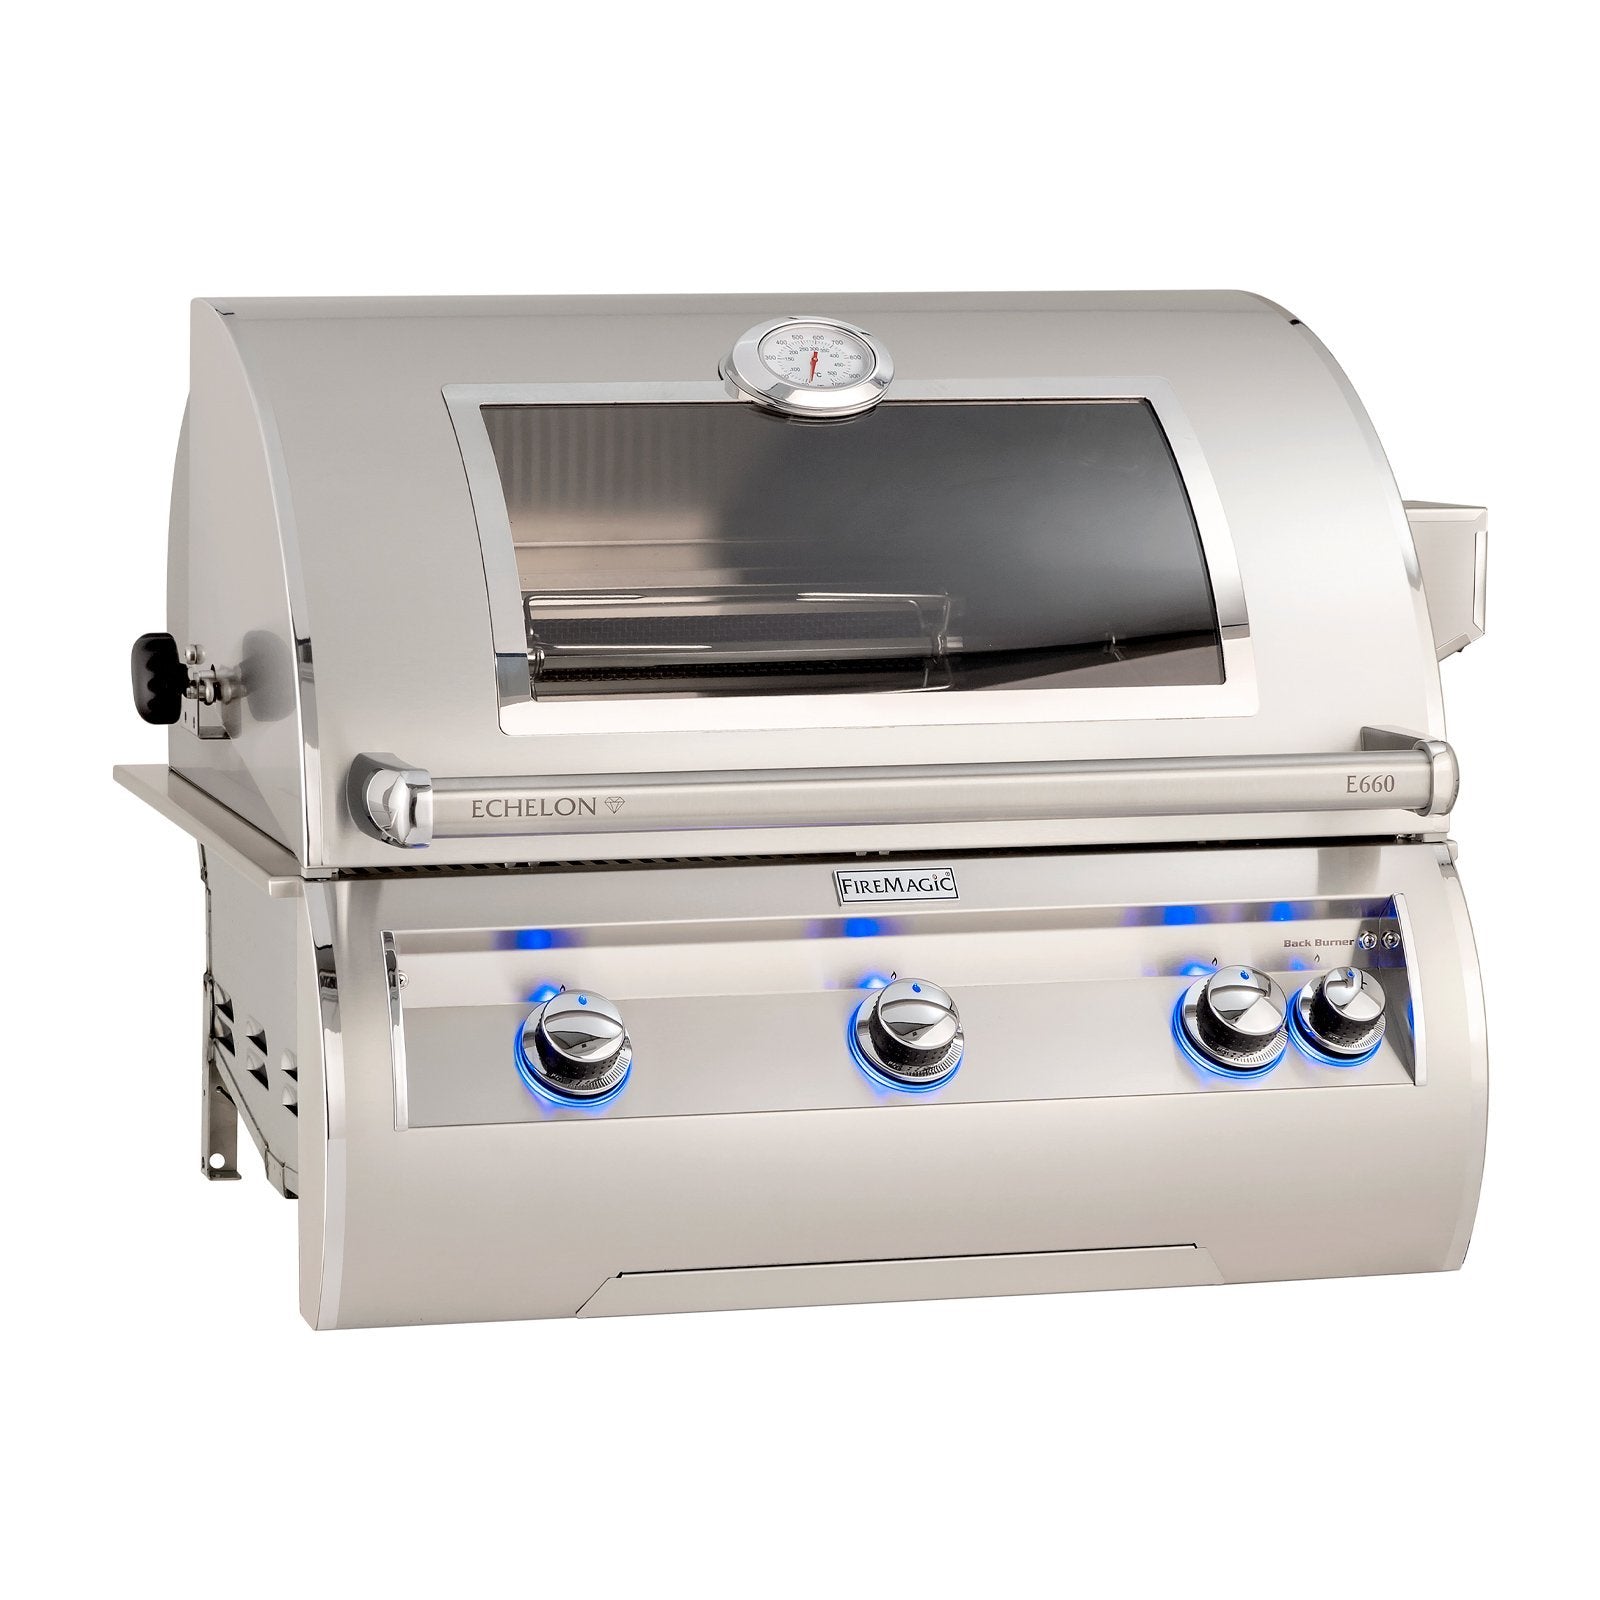 fire-magic-30-e660i-built-in-gas-grill-w-rotisserie-analog-thermometer 1